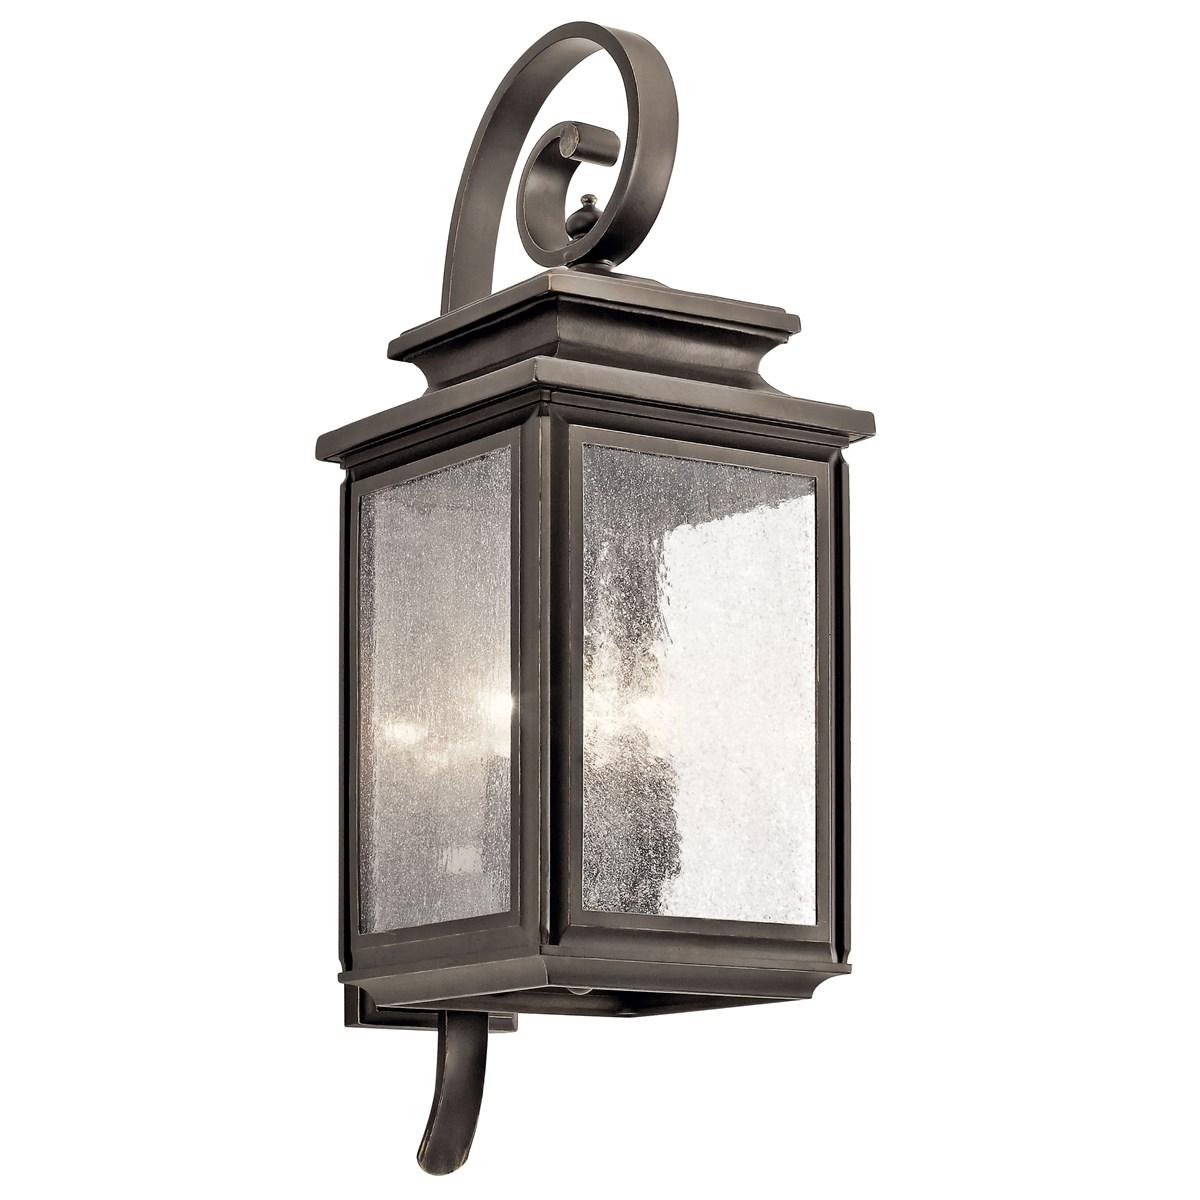 Wiscombe Park 26 in. Outdoor Wall Light